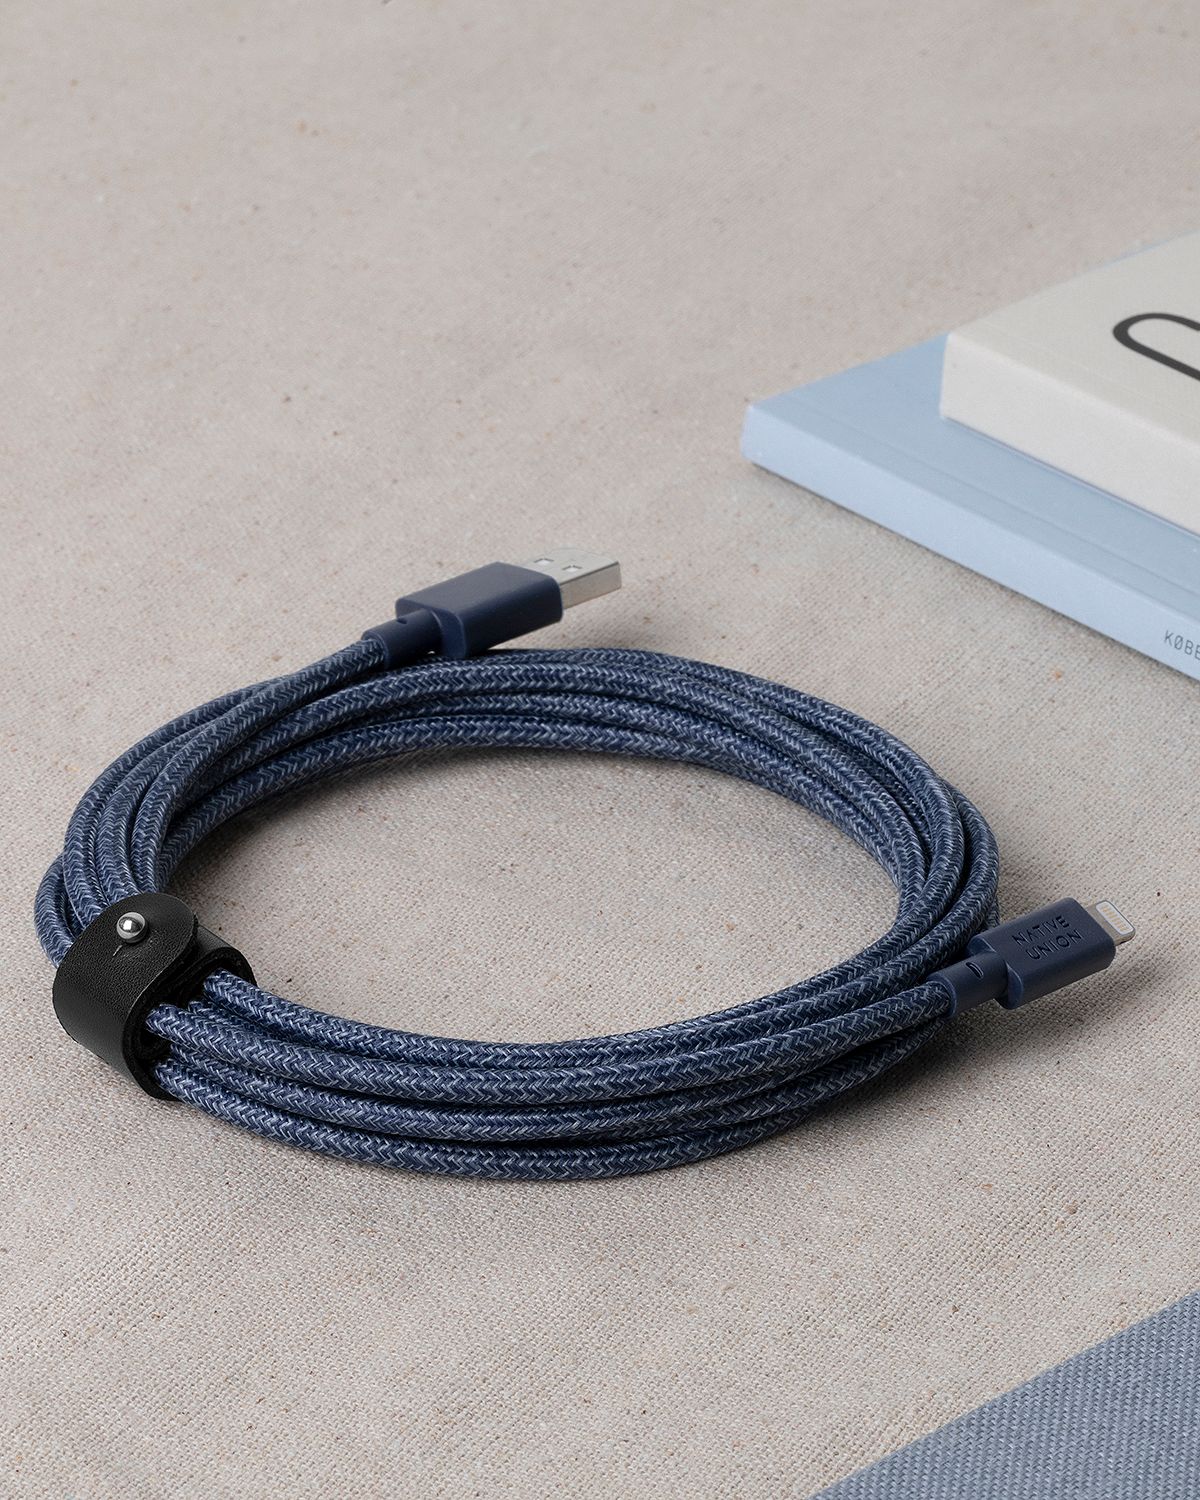 Native Union Cosmos Belt Cable 10' Navy